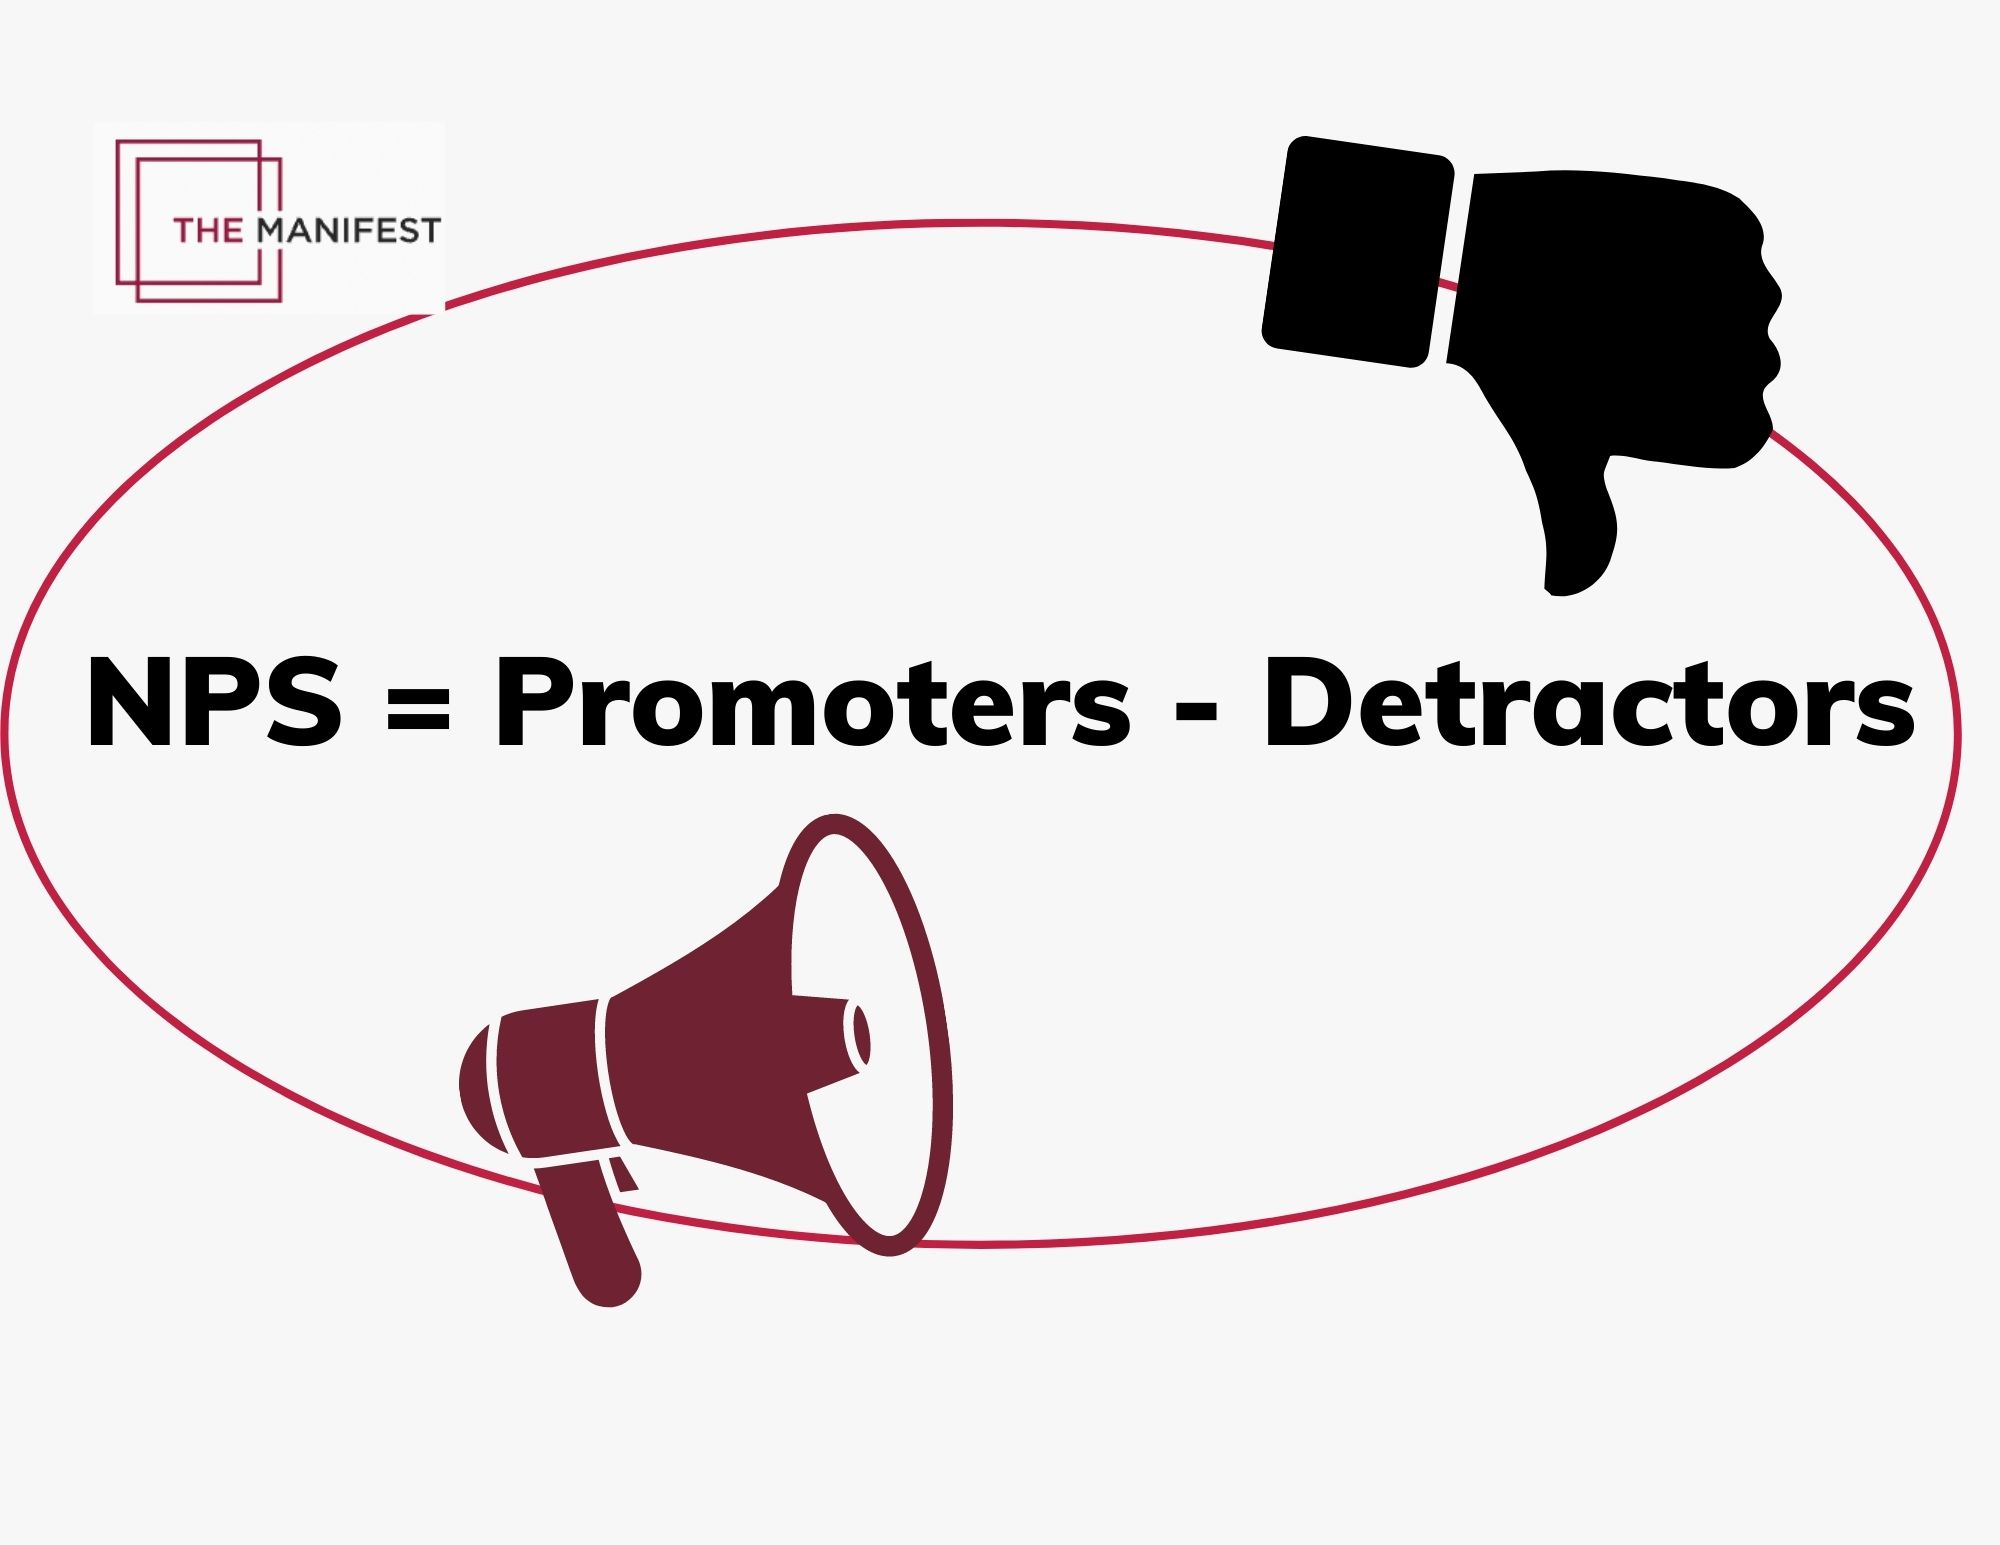 NPS is equal to percent of promoters subtracted by the percent of detractors